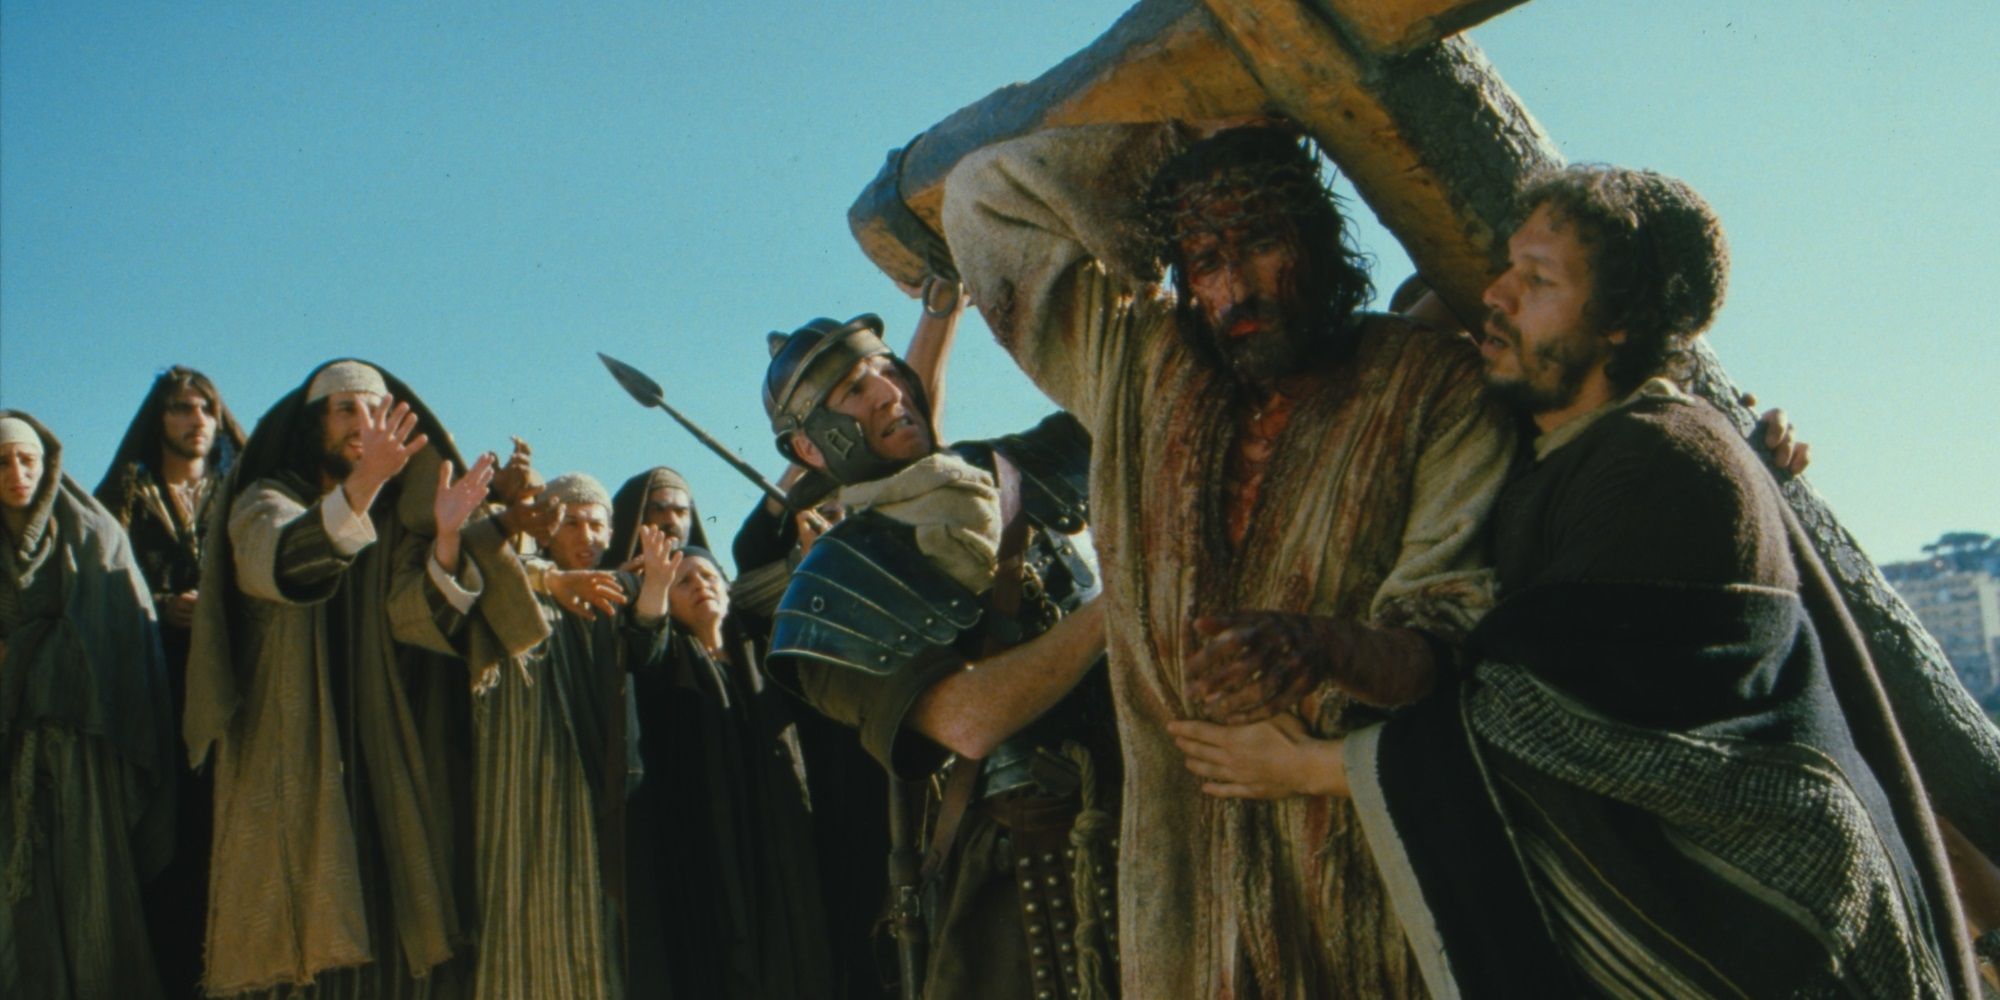 Jesus carrying the cross in The Passion of the Christ